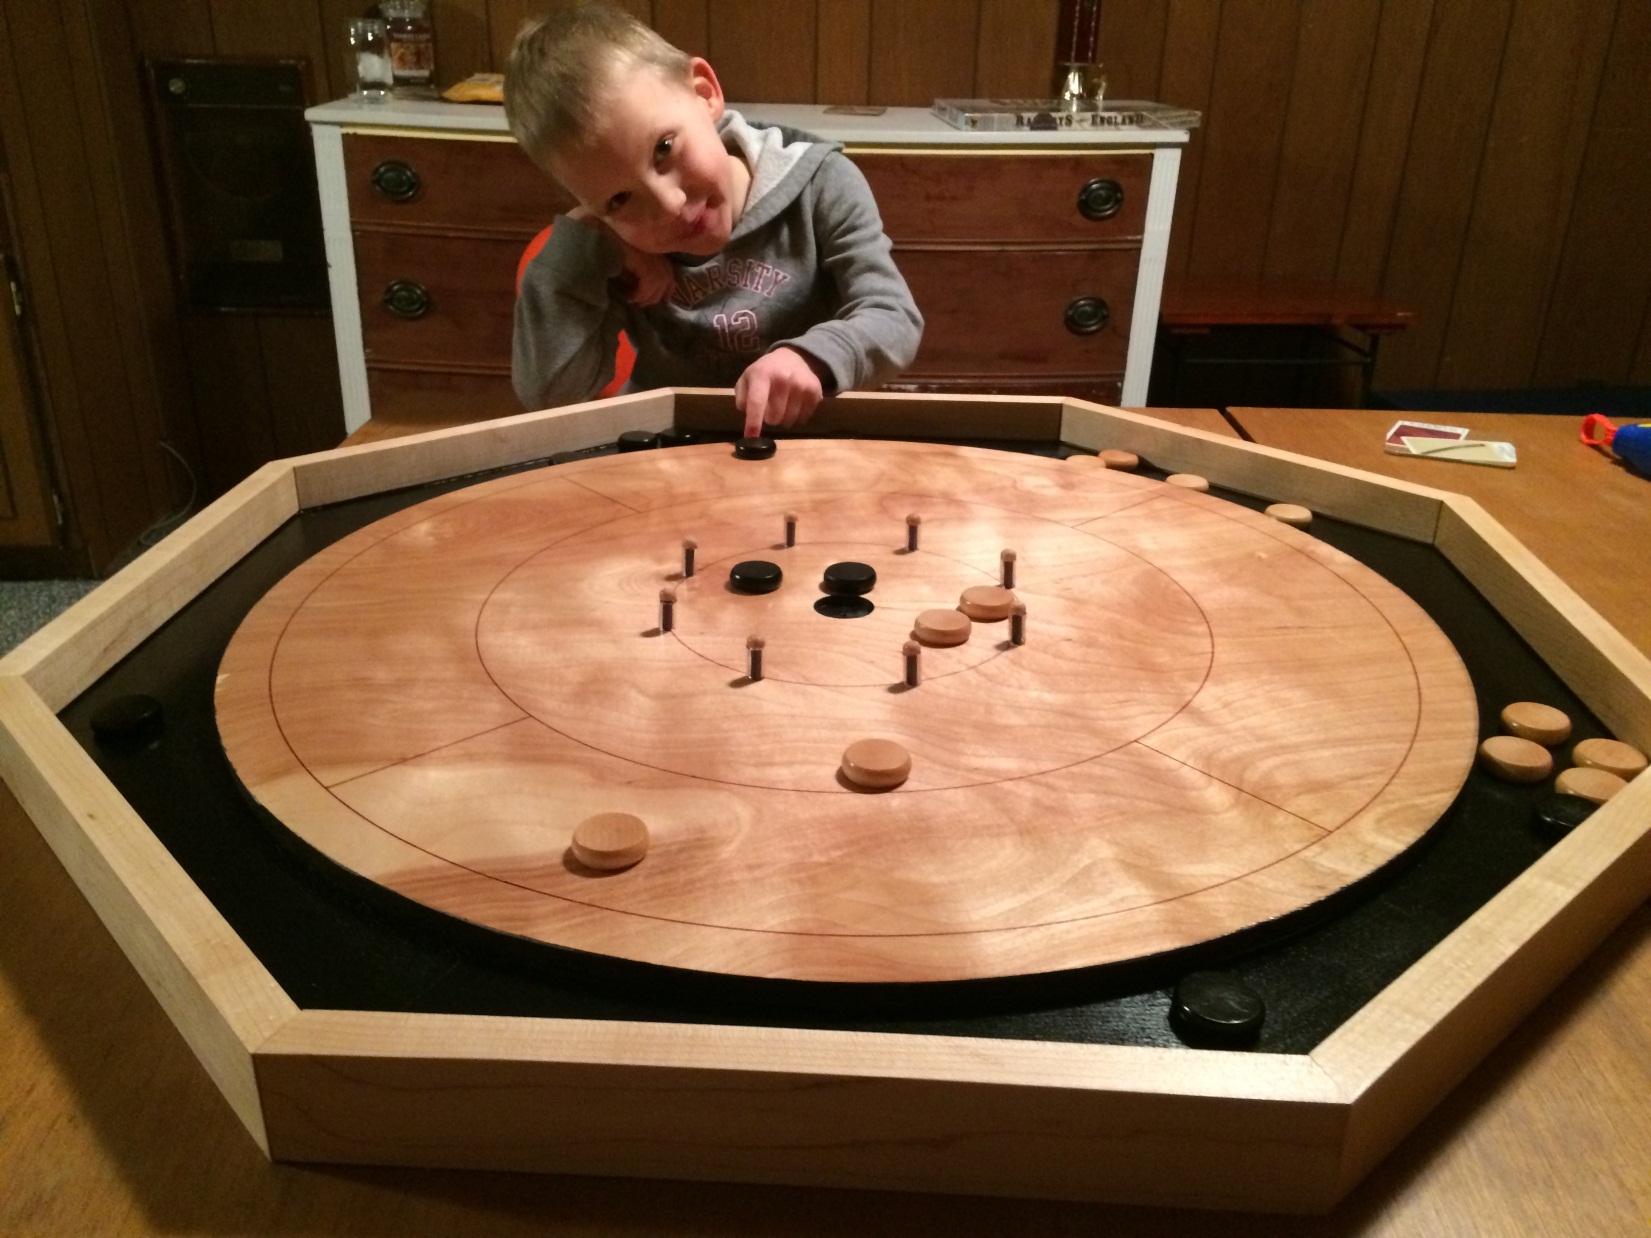 The beginner's guide to the greatest pastimes: Crokinole